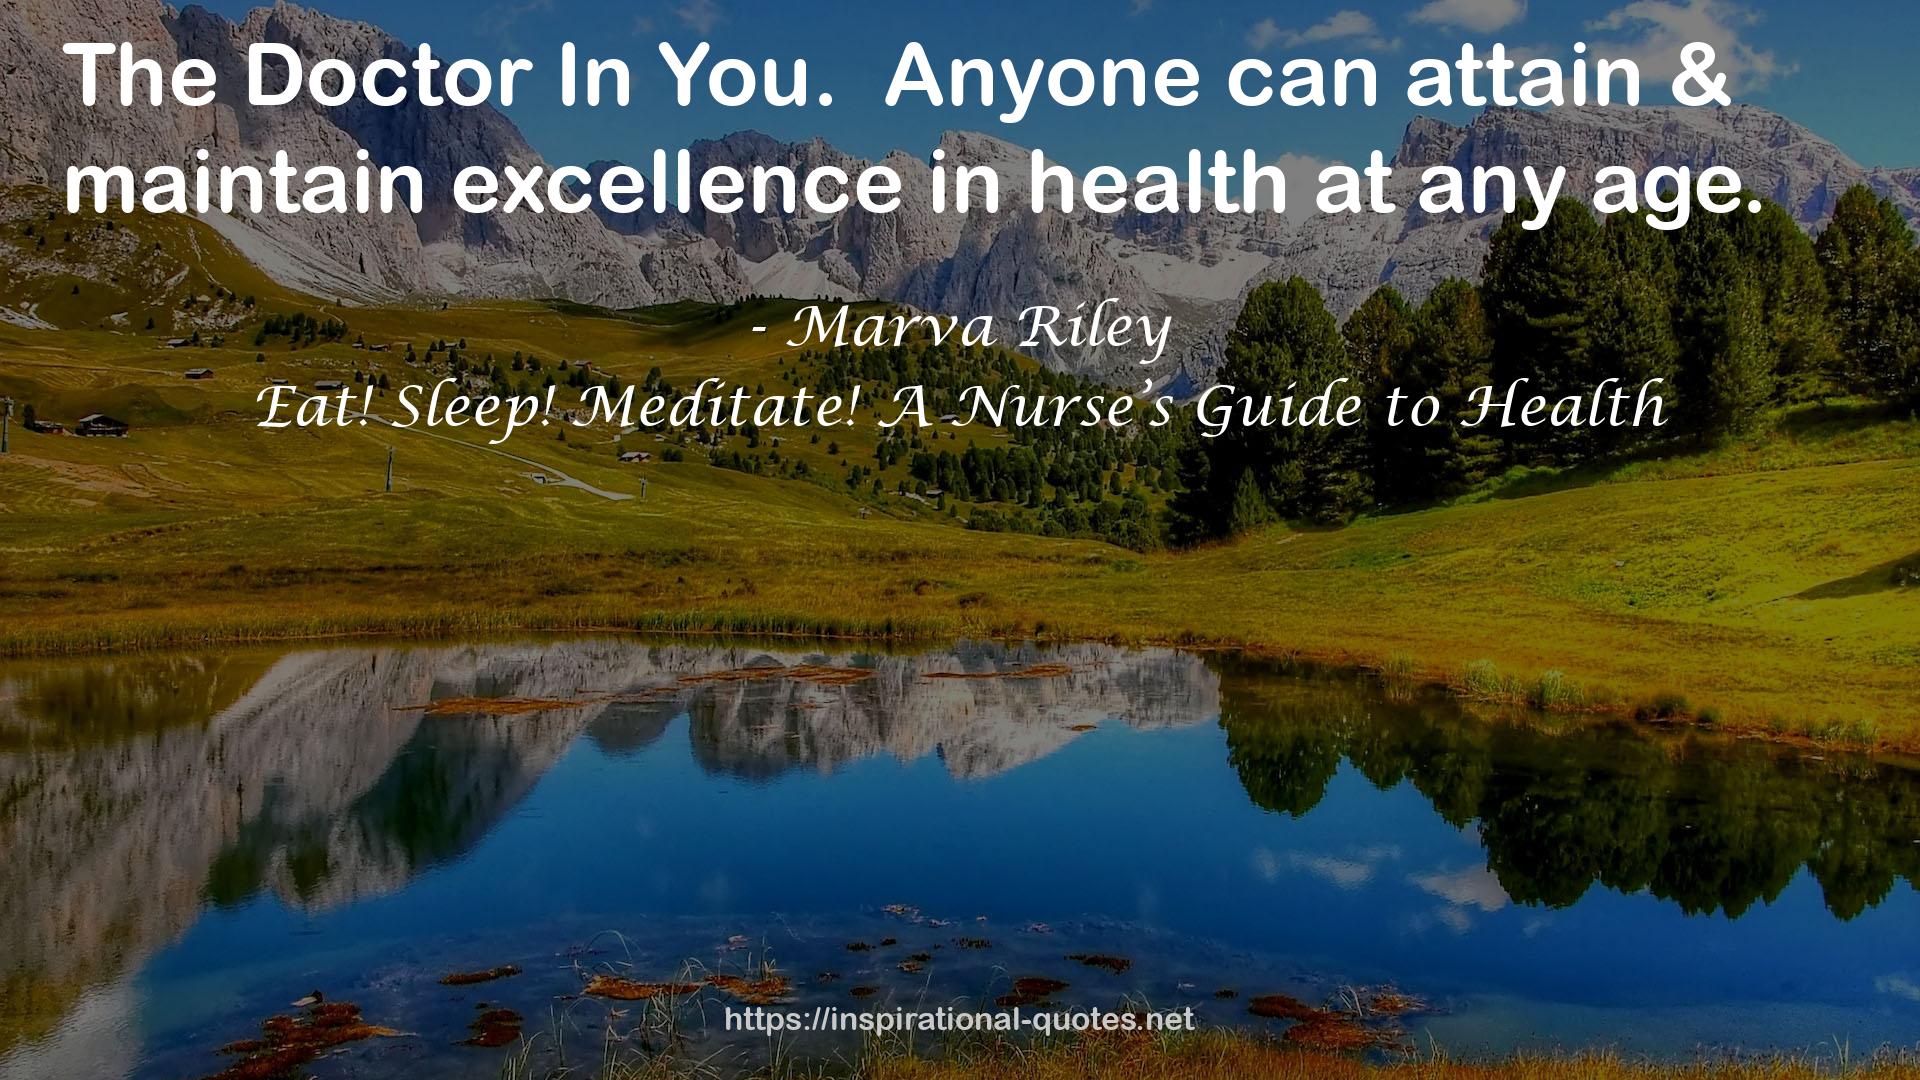 Eat! Sleep! Meditate! A Nurse’s Guide to Health QUOTES